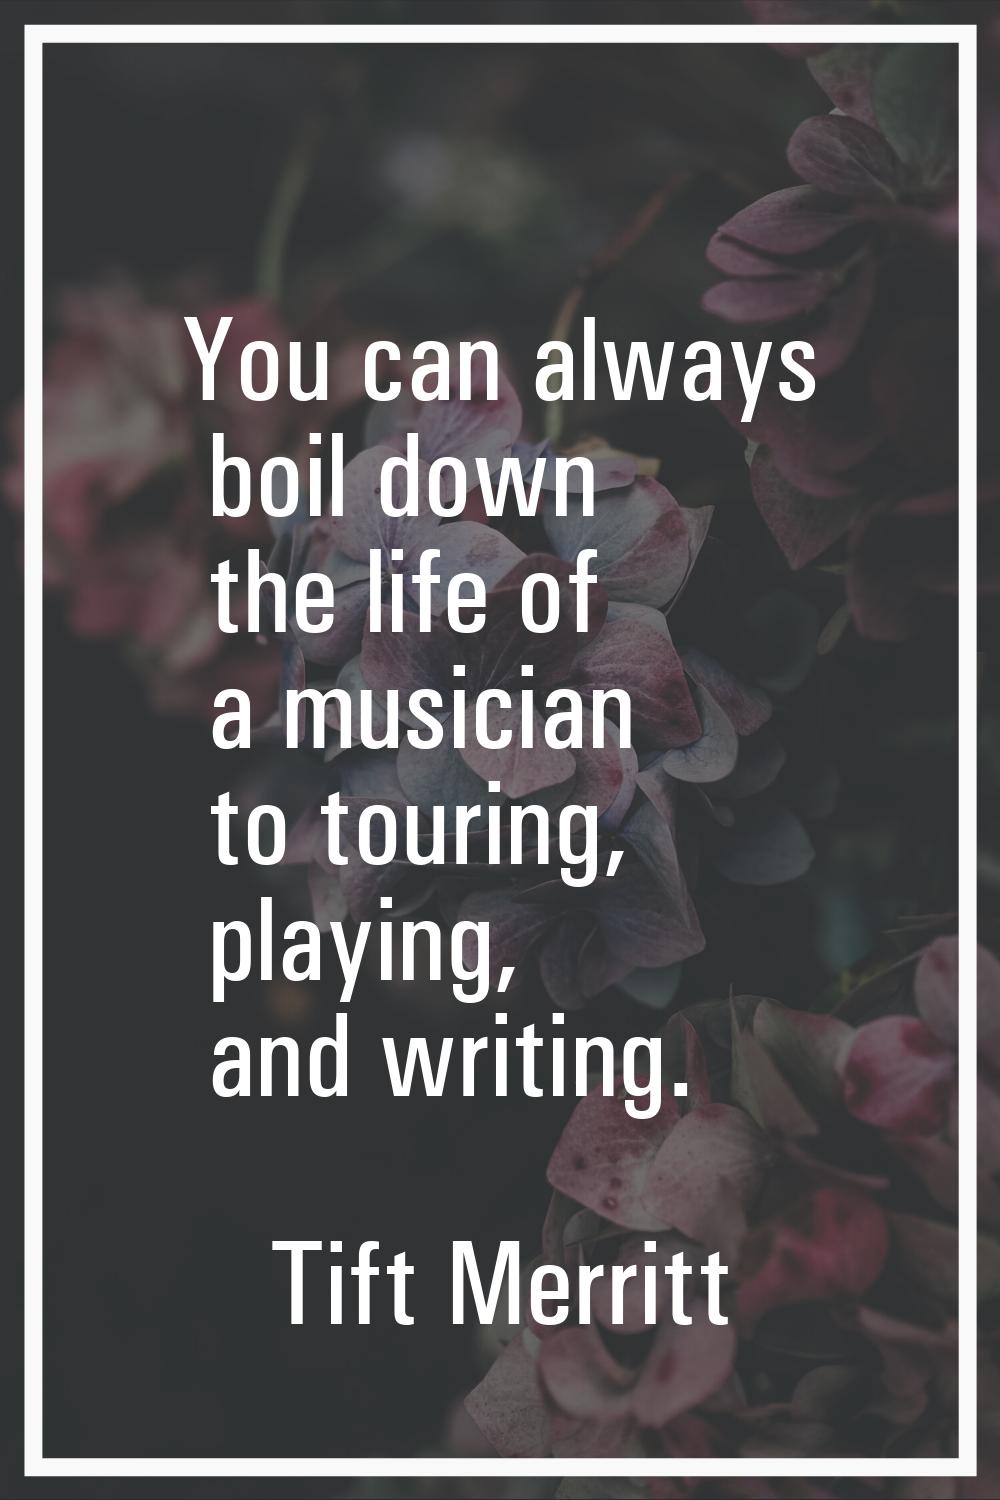 You can always boil down the life of a musician to touring, playing, and writing.